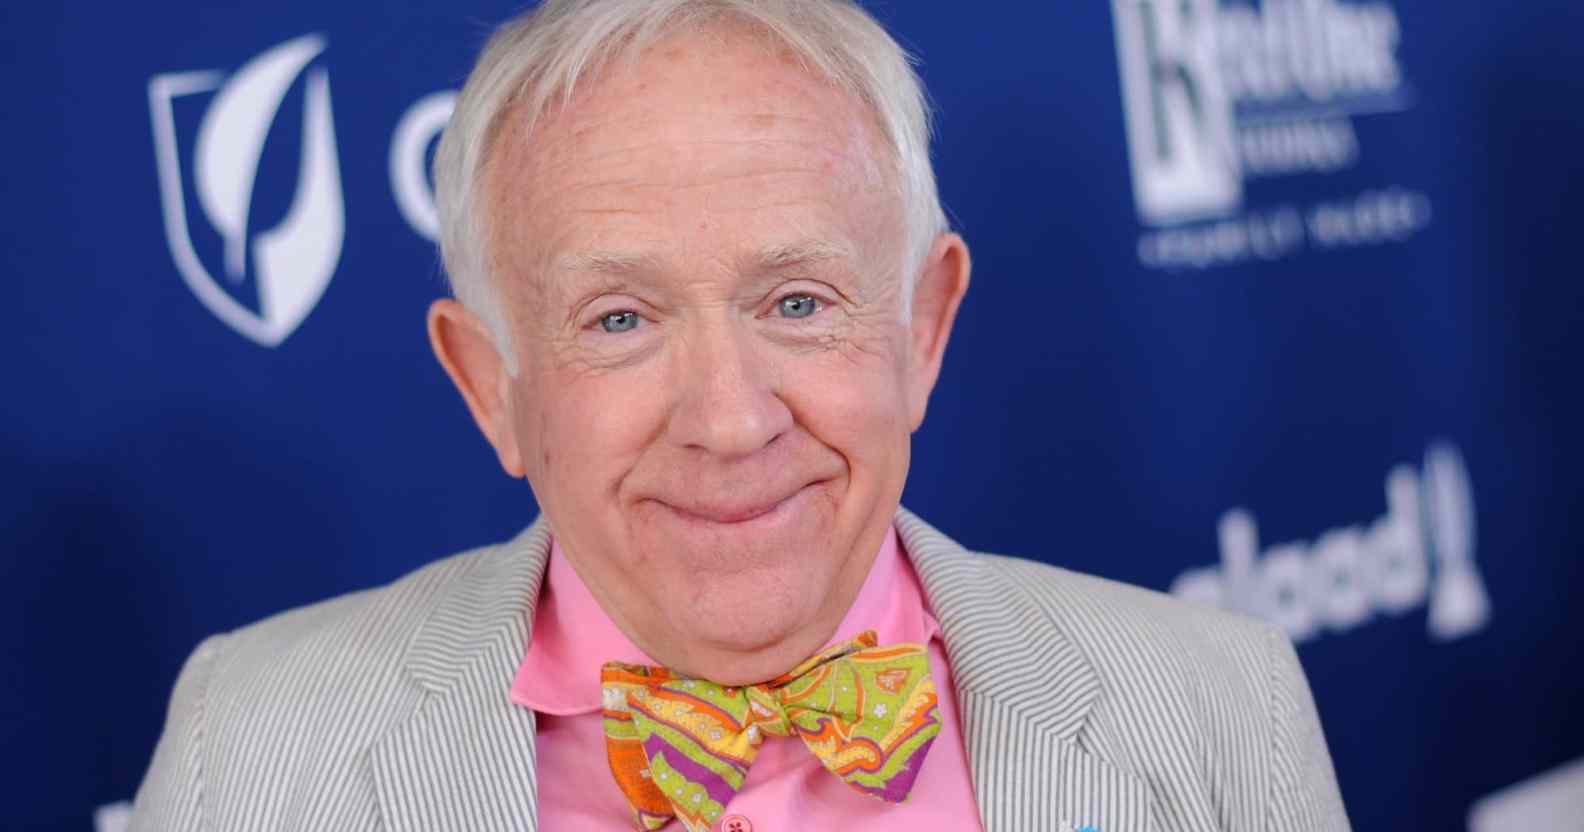 An image of late actor Leslie Jordan wearing a grey suit jacket, pink shirt and yellow and pink bow tie